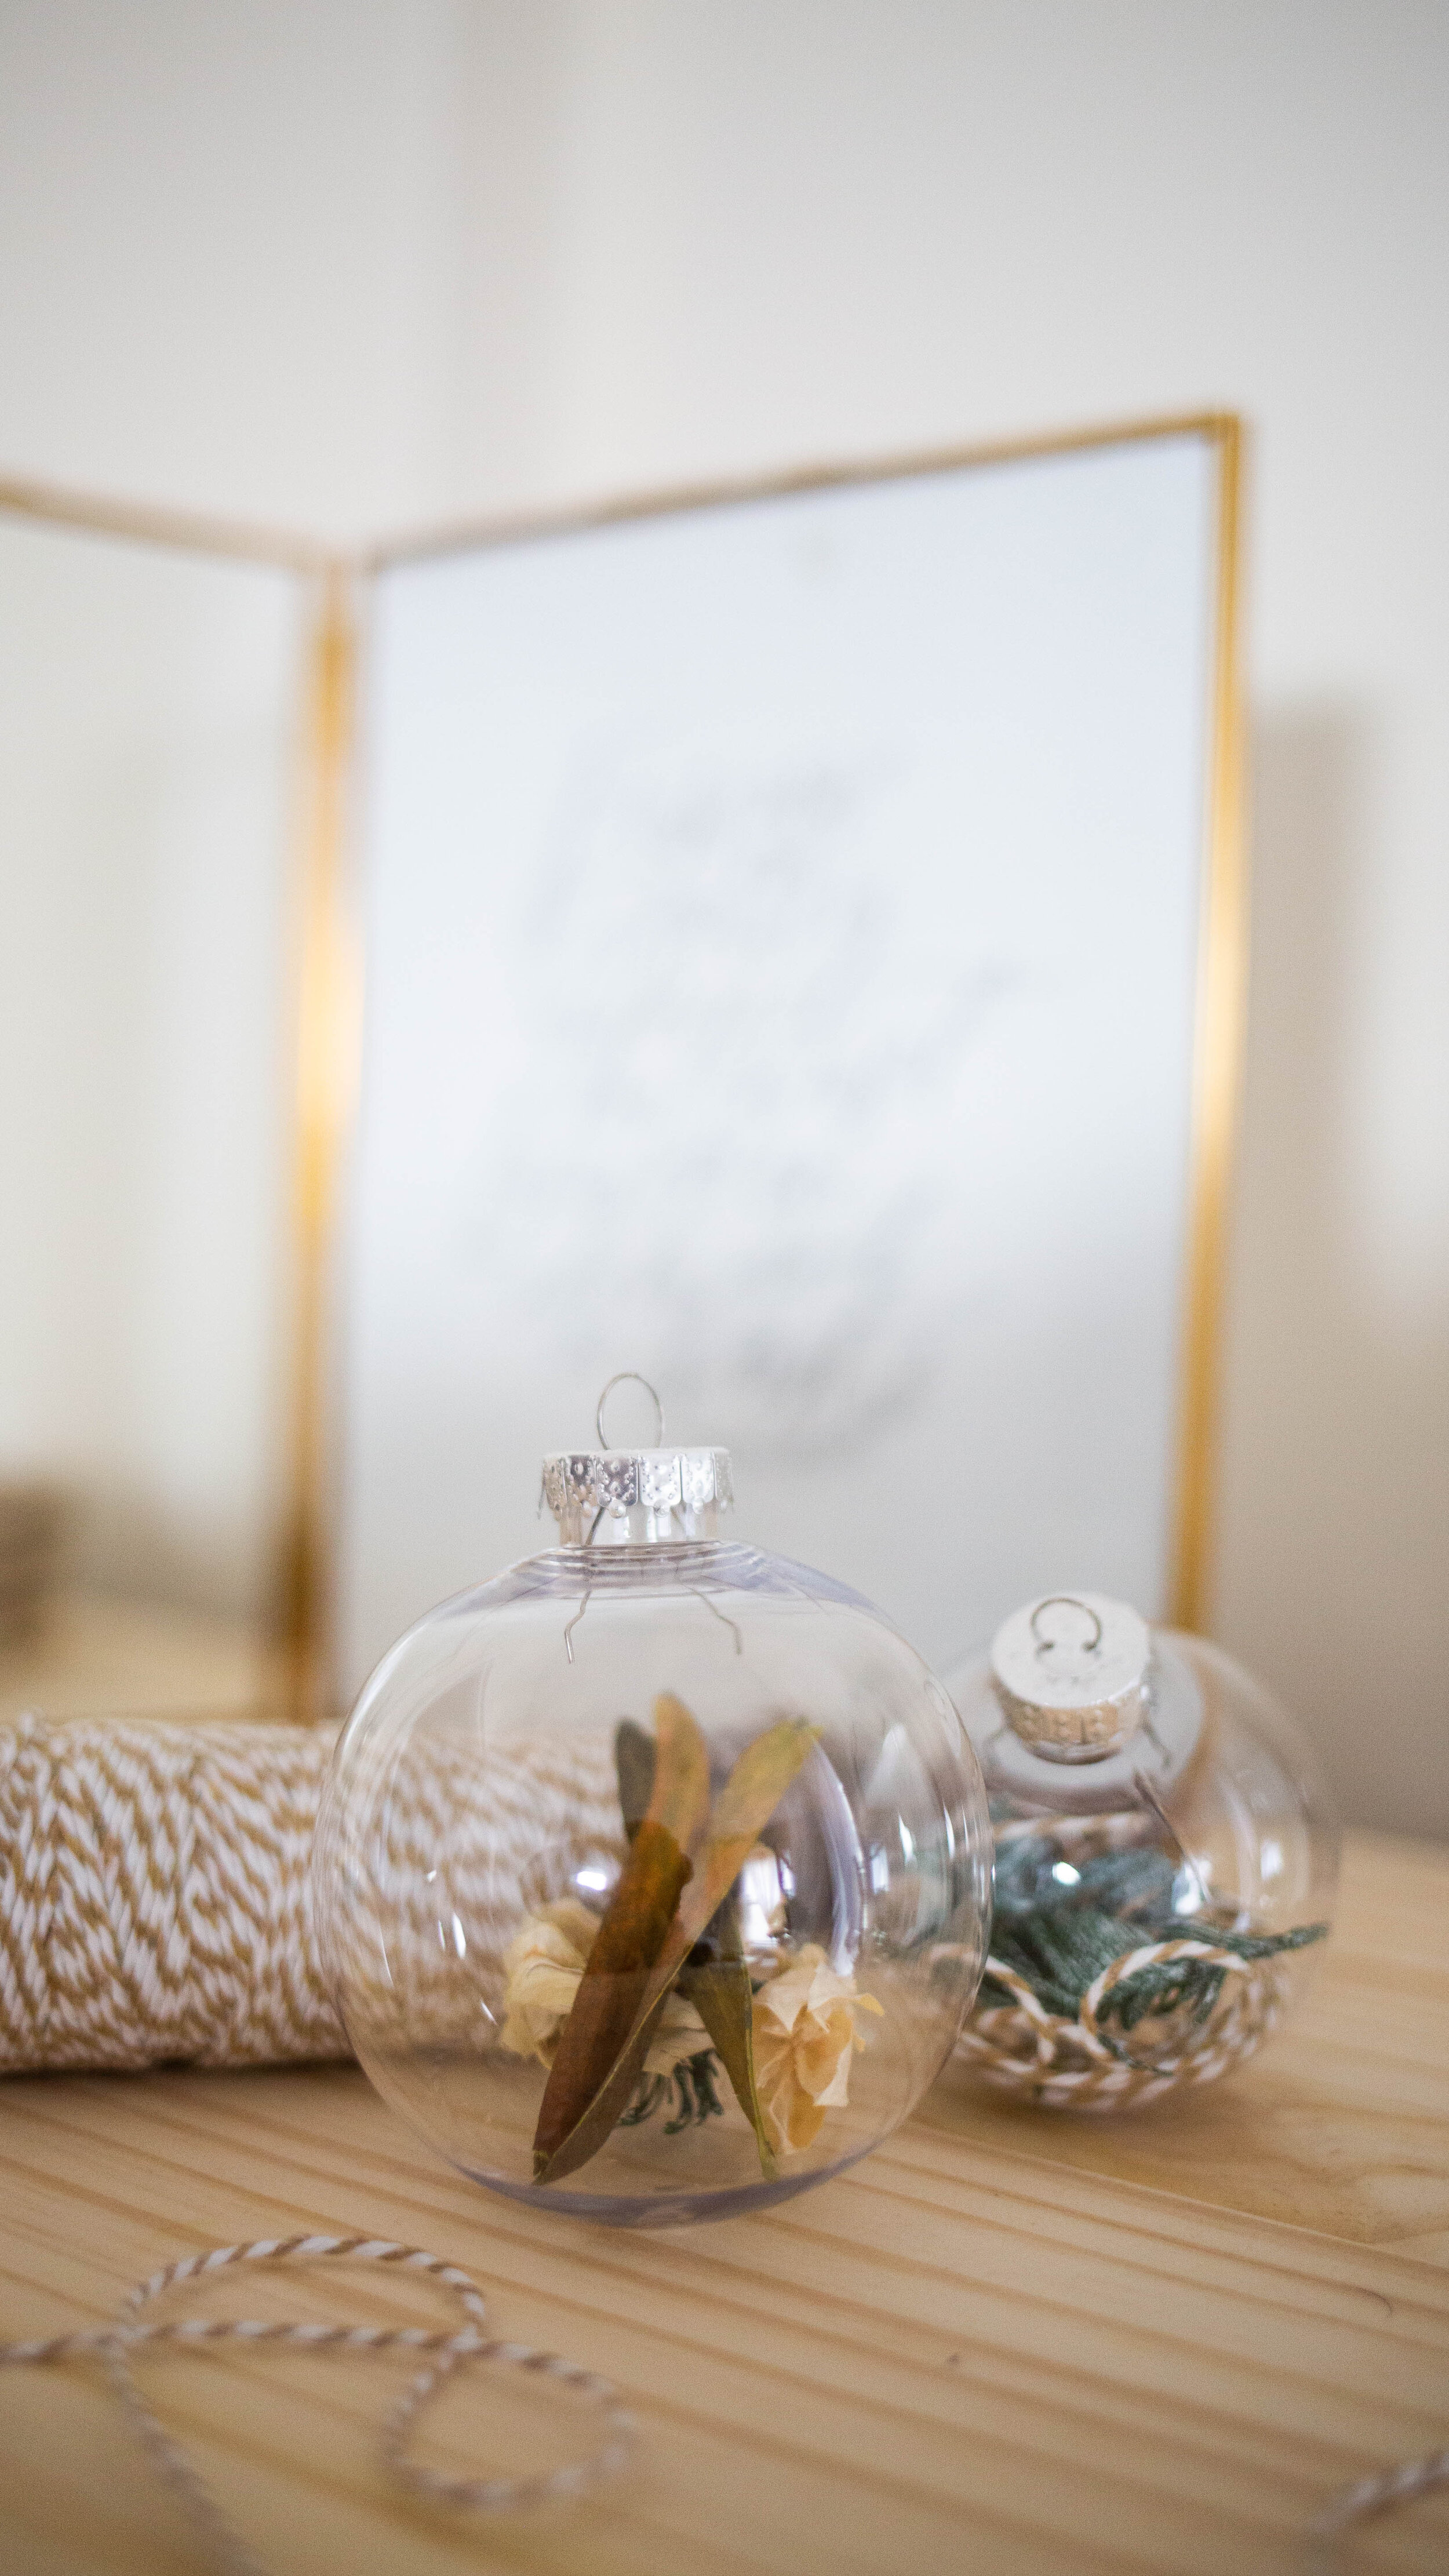 Clear ornaments, twine, and greenery for a neutral Christmas pallet 